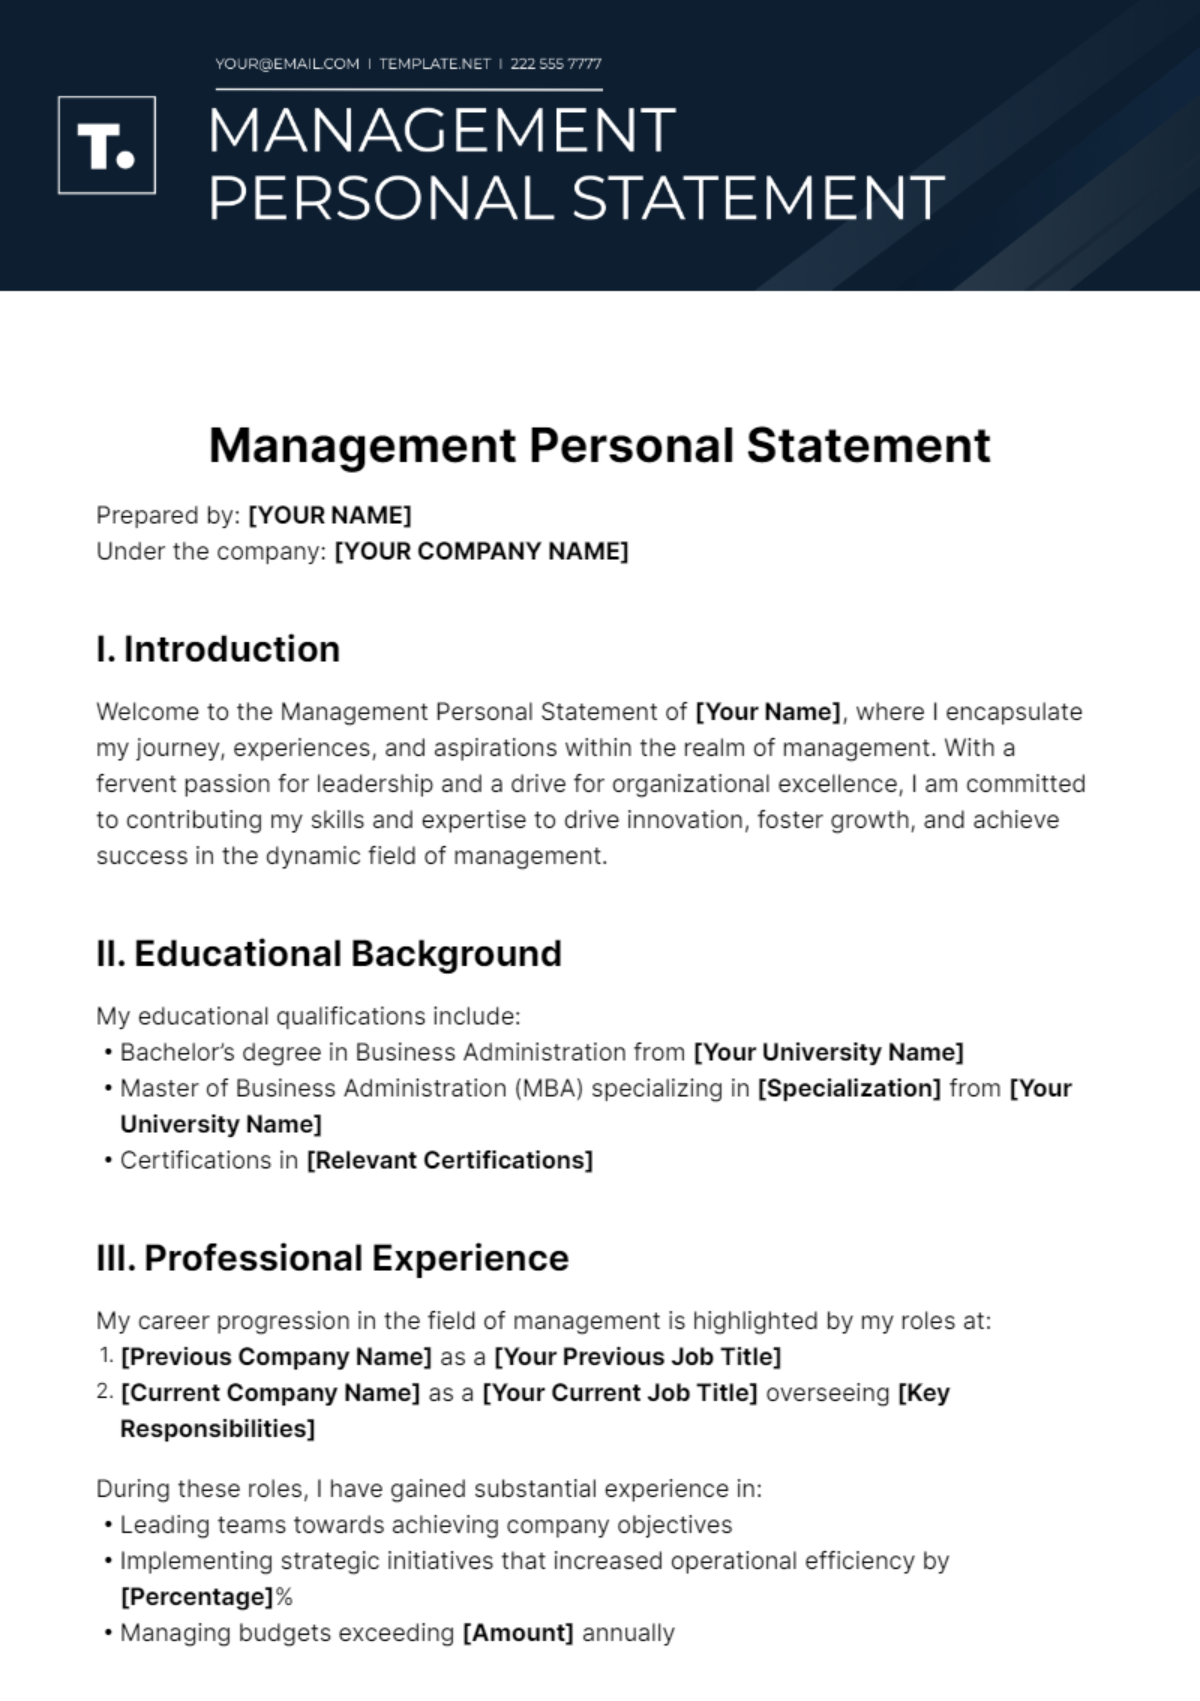 Management Personal Statement Template